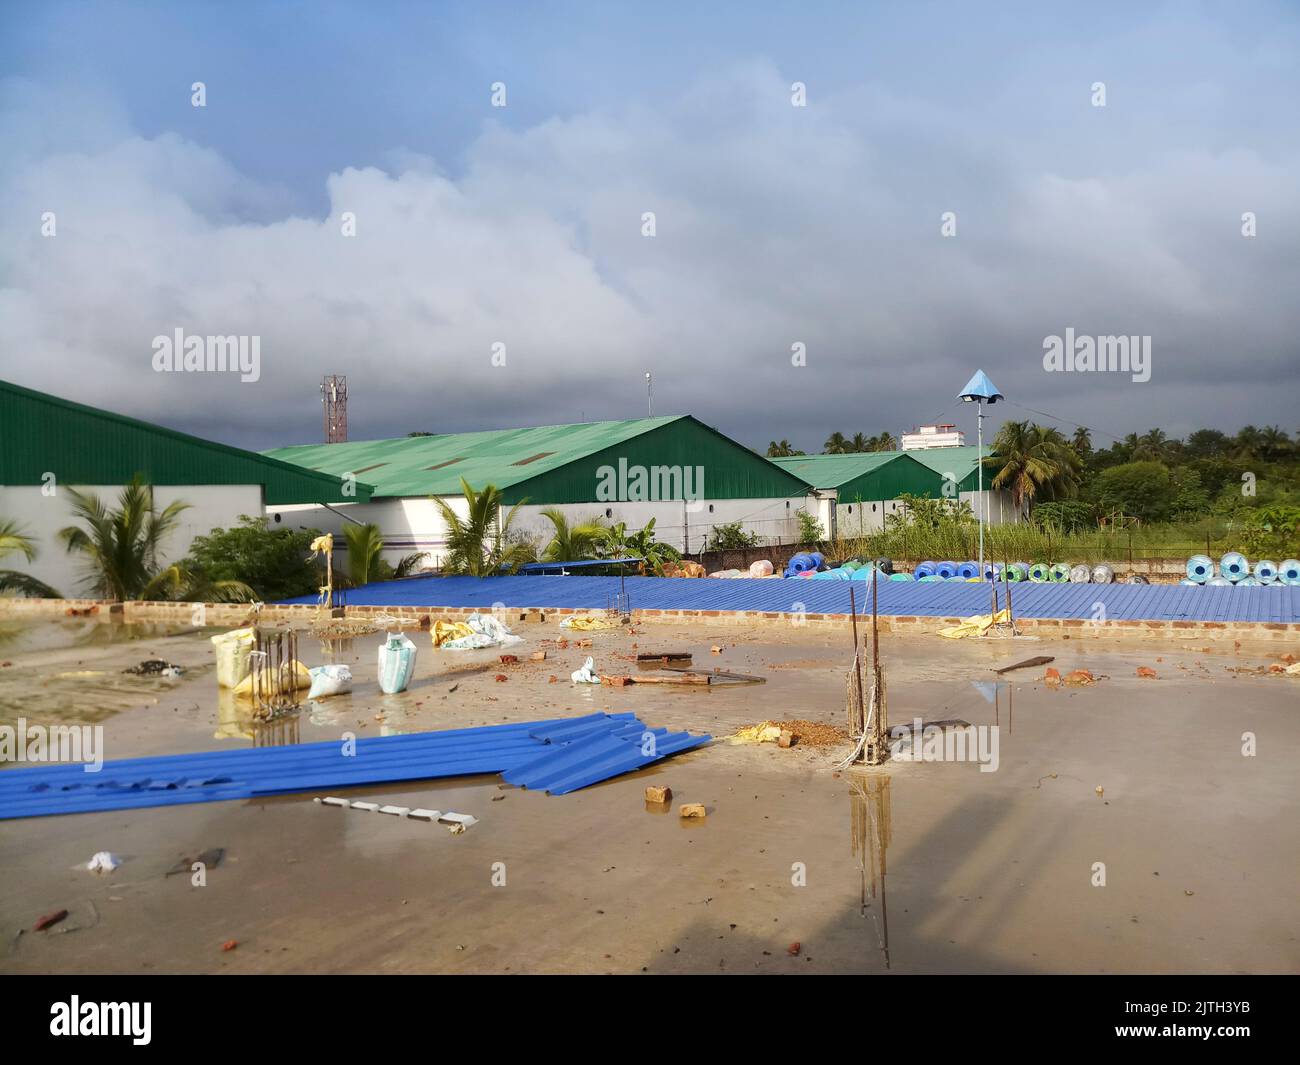 Kolkata, West Bengal, India - 29th July 2019 : Roof top of a factory with blue cloudy sky in background, Stock Photo